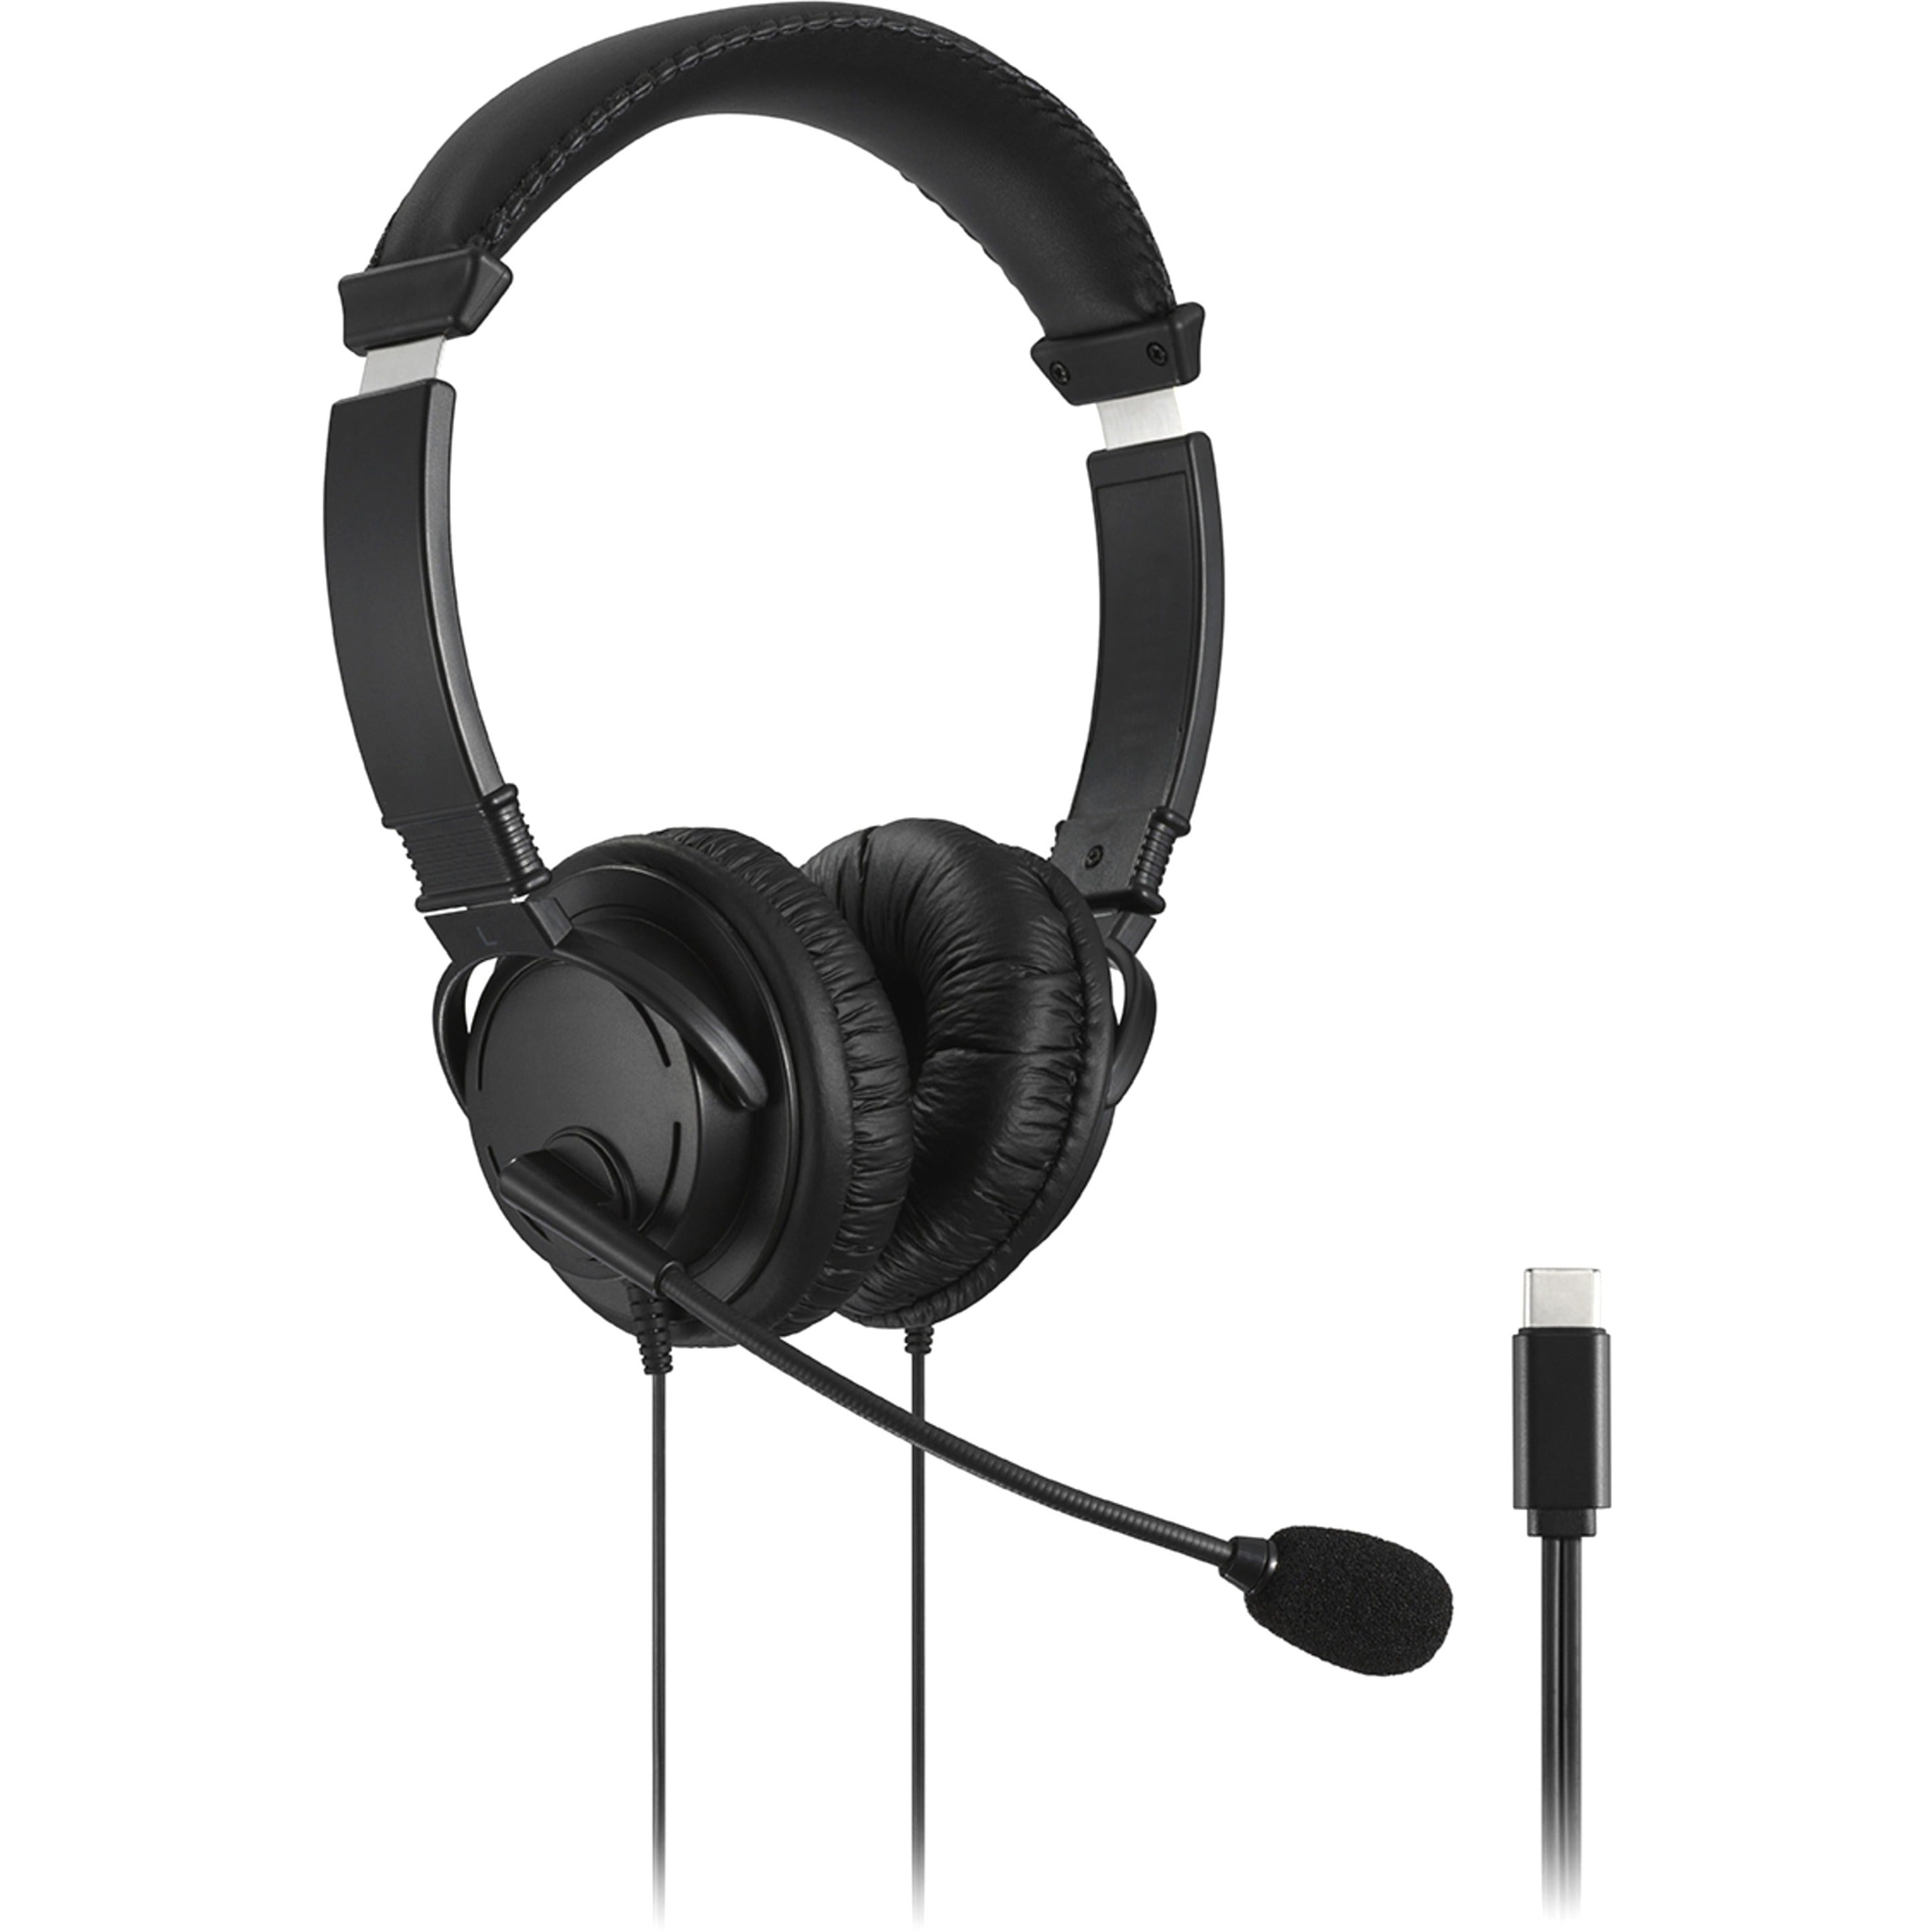 Kensington K97457WW Classic USB-C Headset with Mic, Comfortable, Noise Cancelling, 6 ft Cable Length